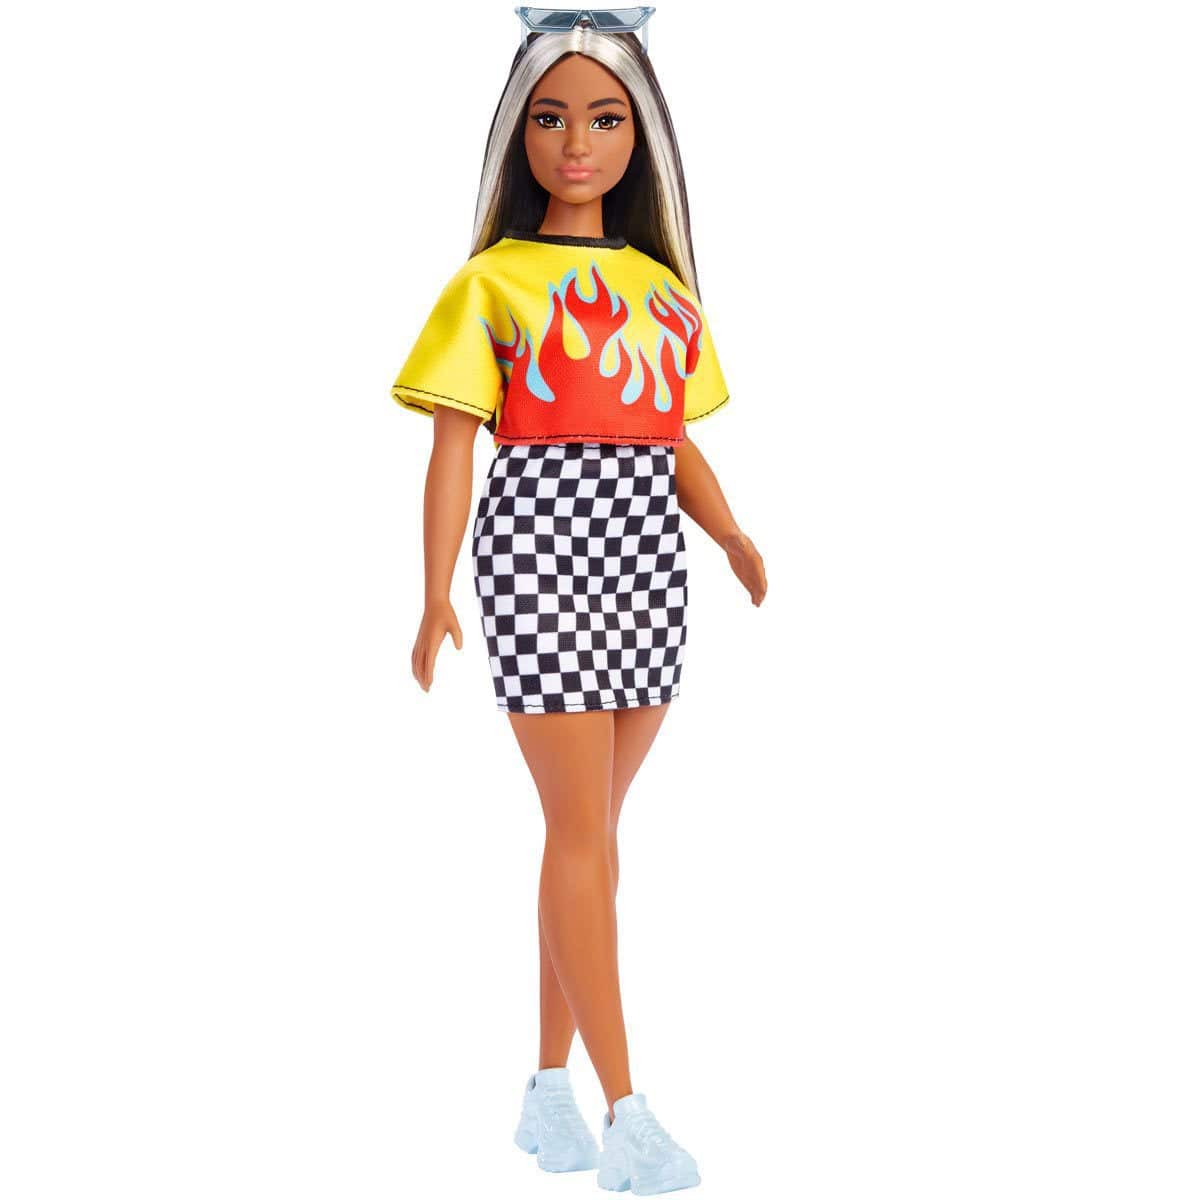 Barbie Fashionistas Curvy Doll #179 Long Highlighted Hair & Flame Crop Top